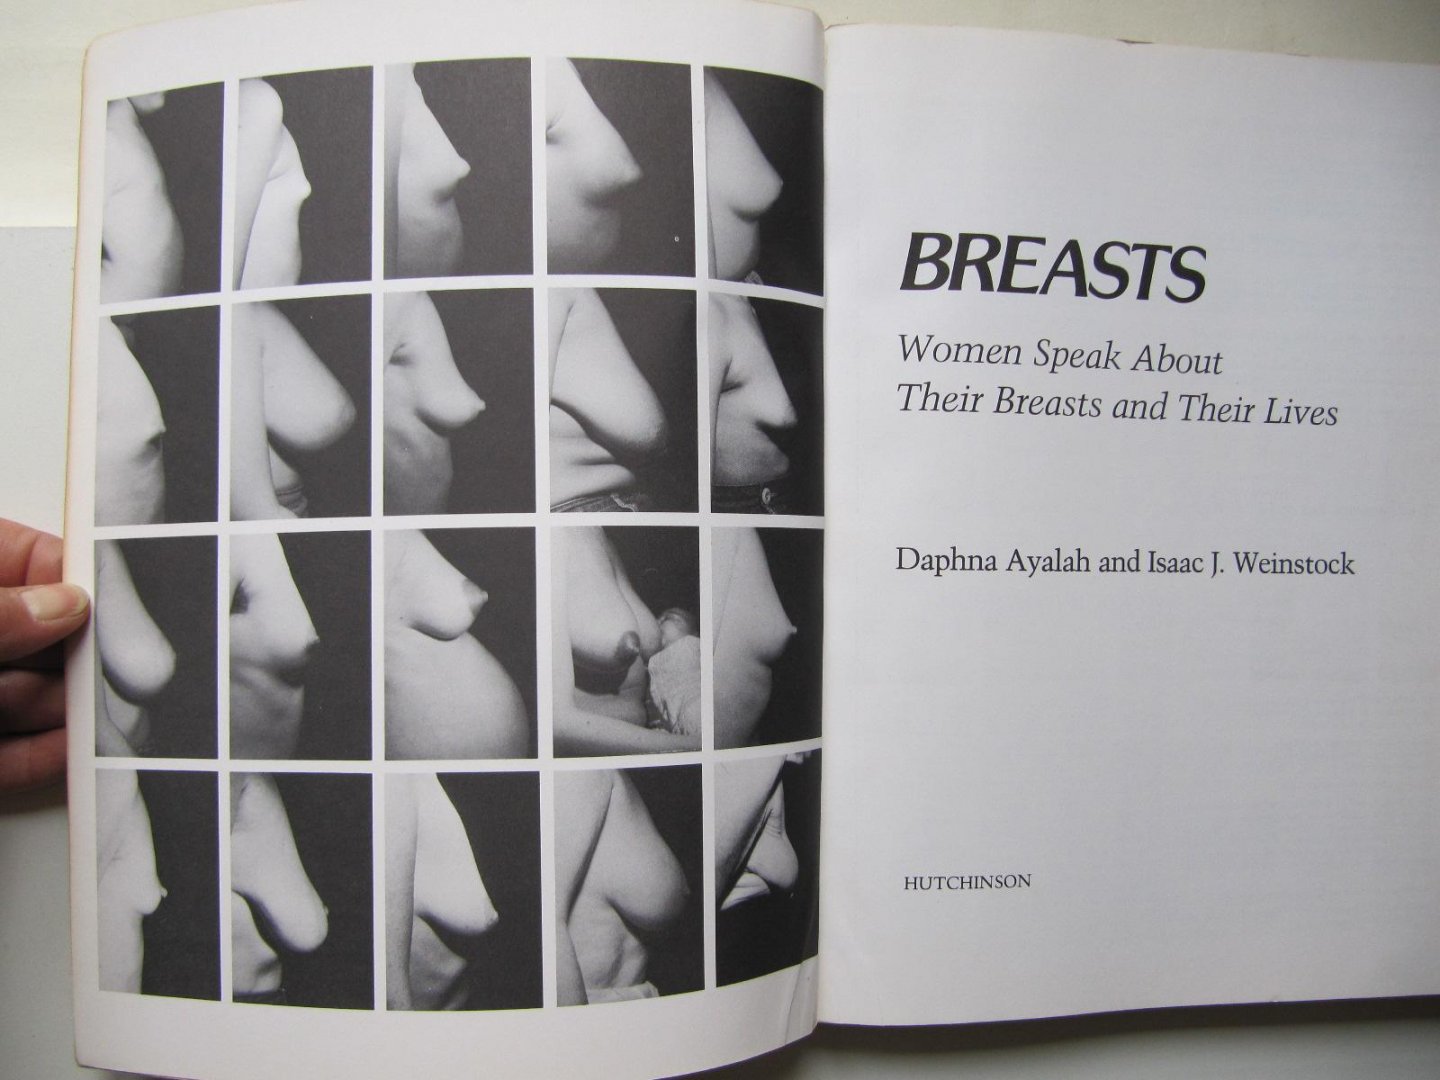 Daphna Ayalah and Isaac J. Weinstock - Breasts / Women speak about hteir breasts and their lives.